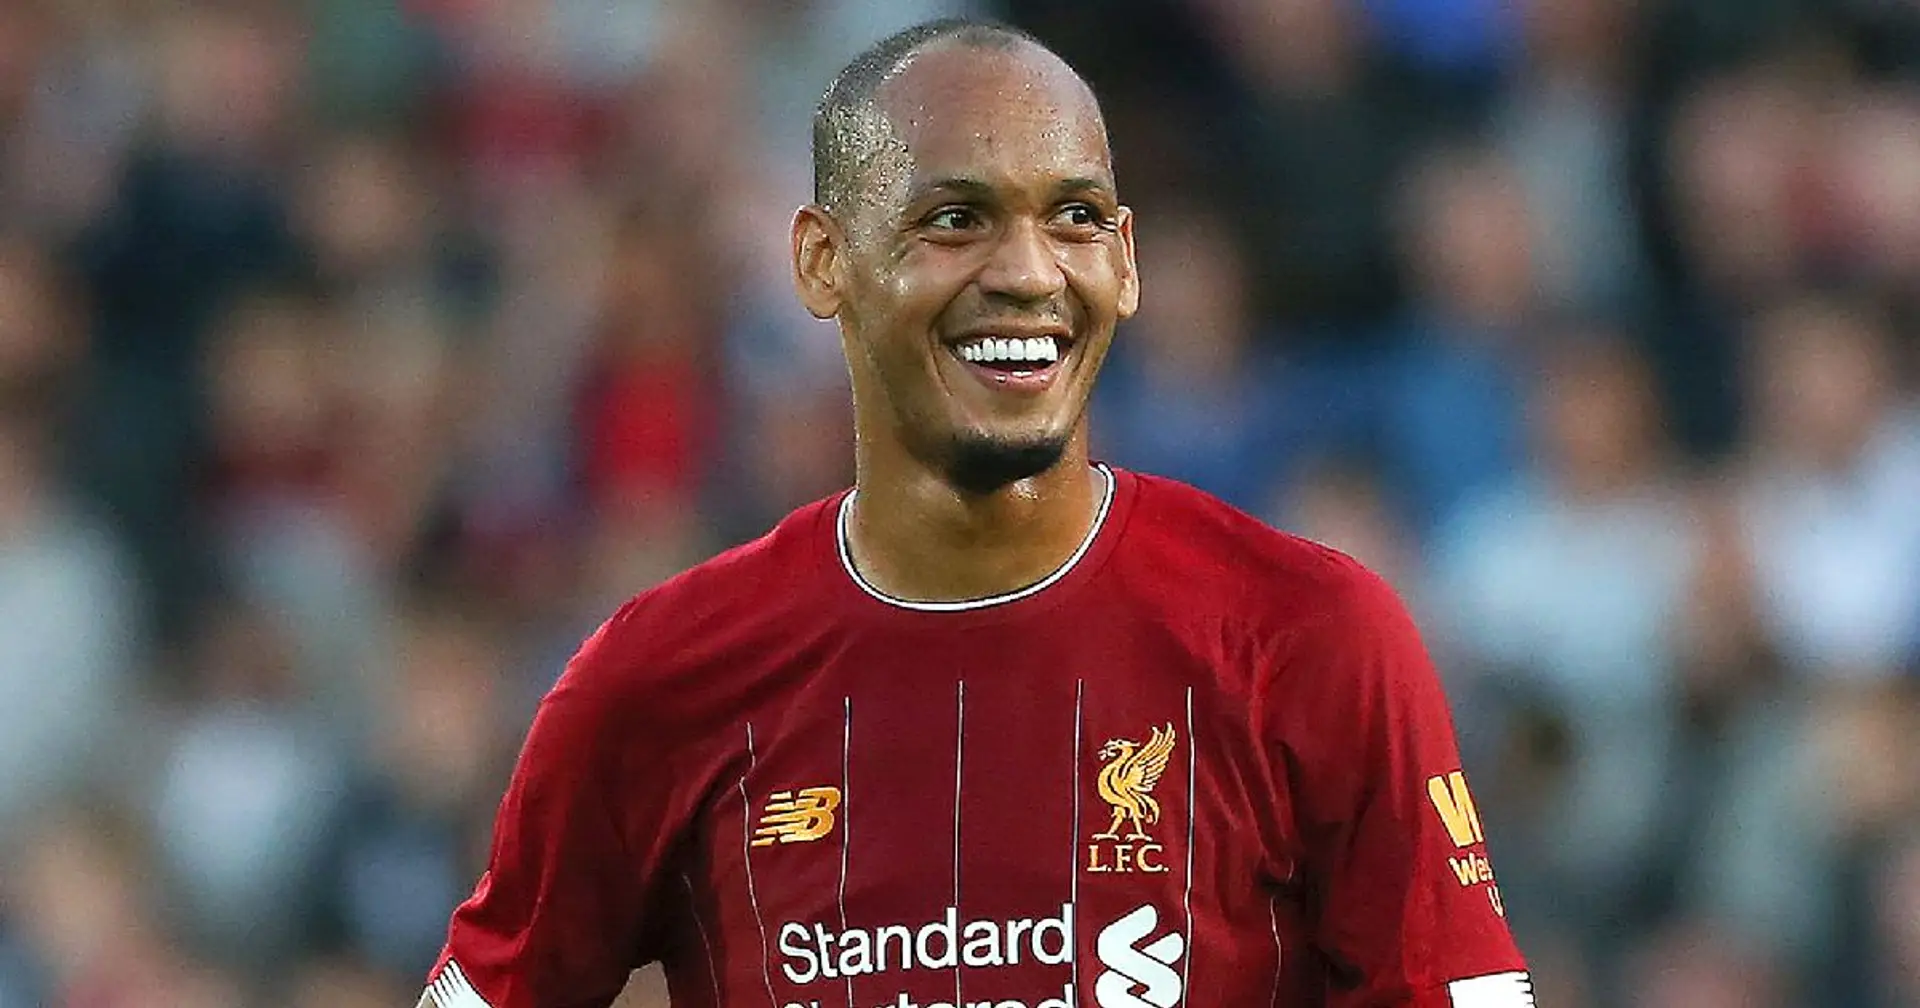 Journalist explains how Liverpool would have missed out on transformational Fabinho signing if not for transfer error